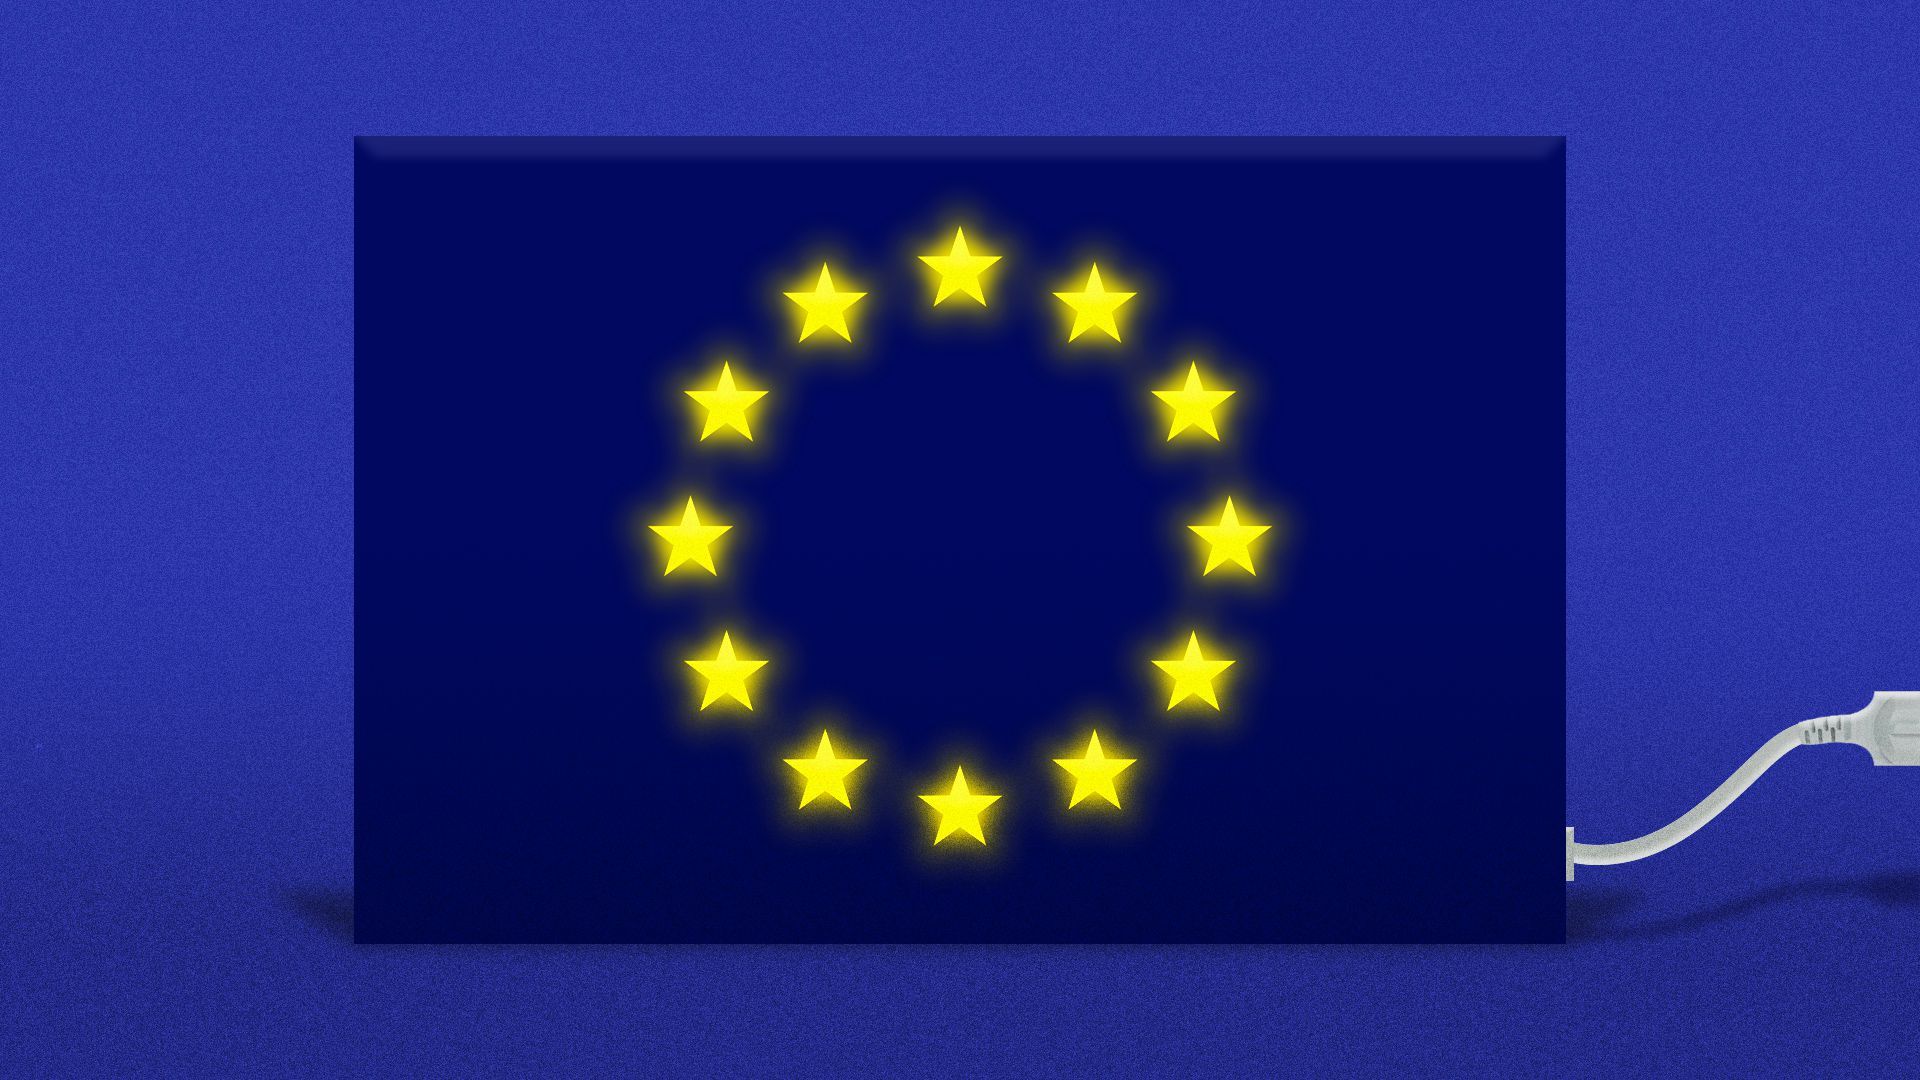 Illustration of a the stars on a plugged in EU flag turned on and glowing.